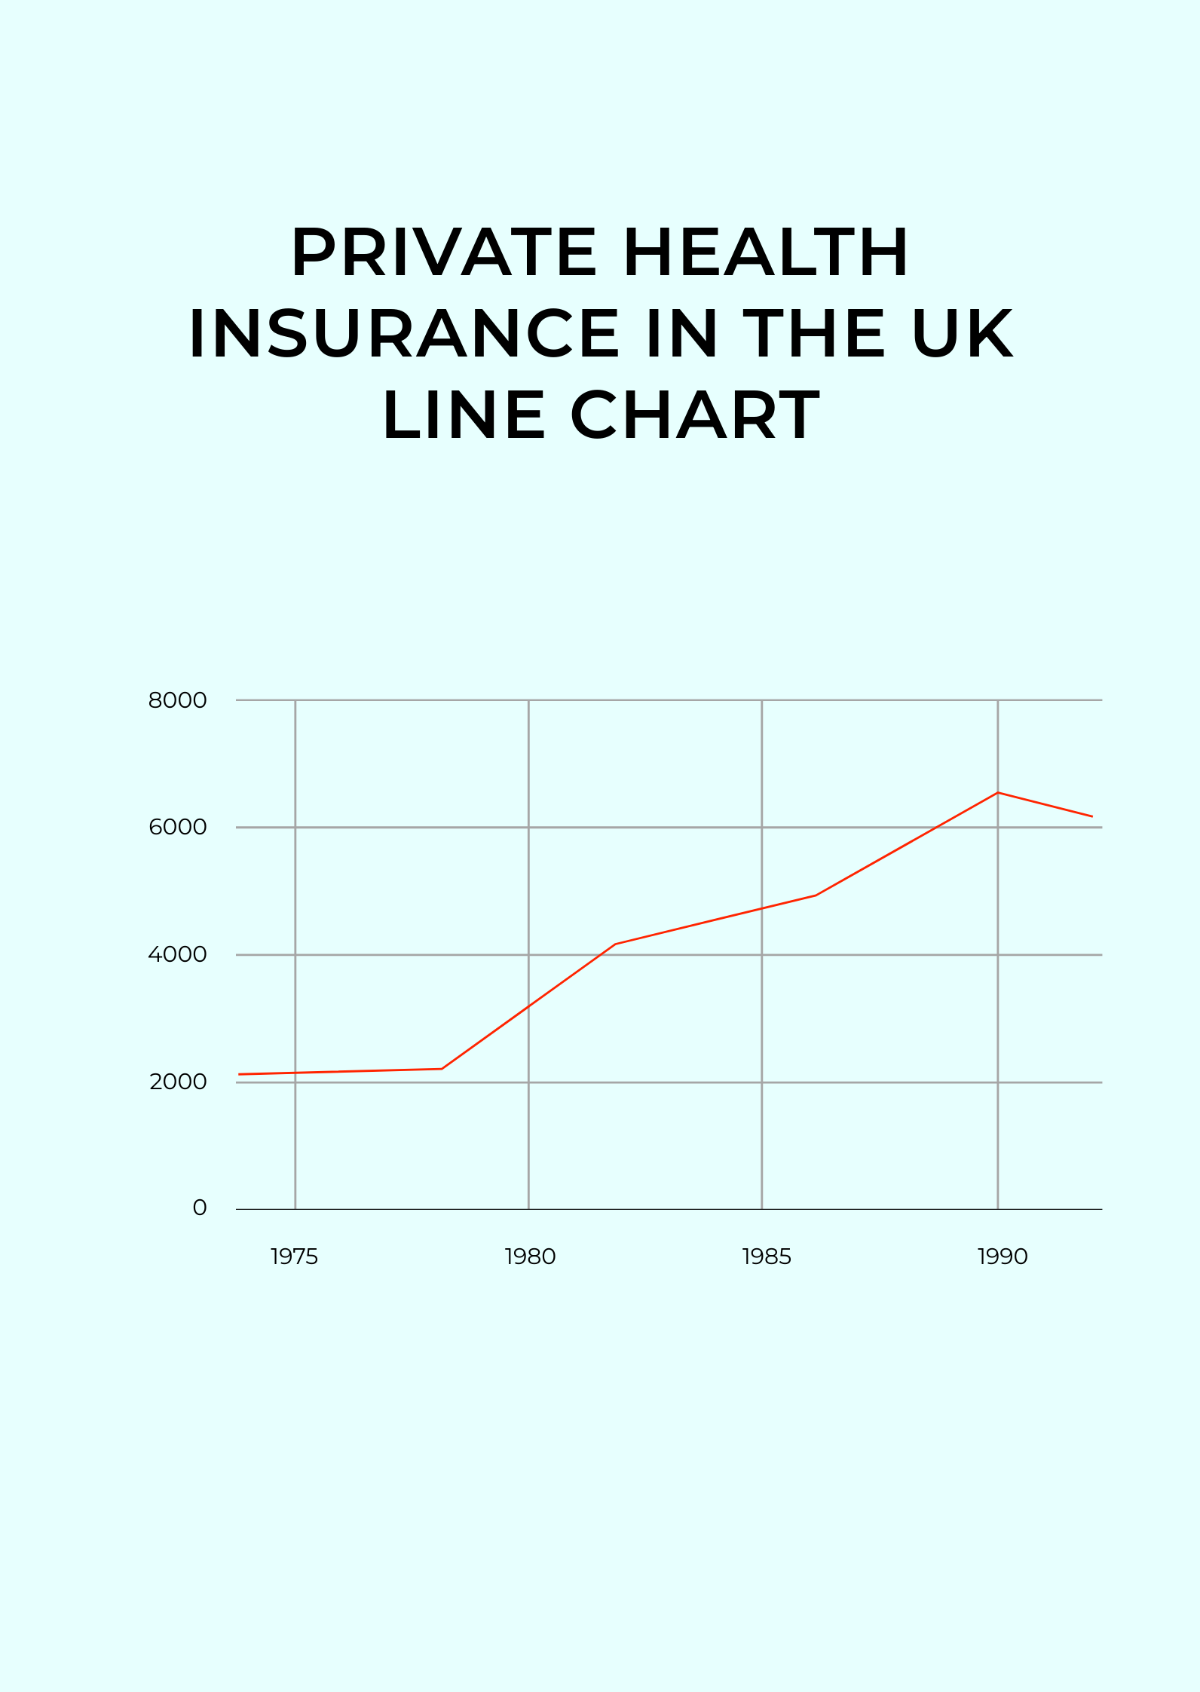 Private Health Insurance in the UK Line Chart